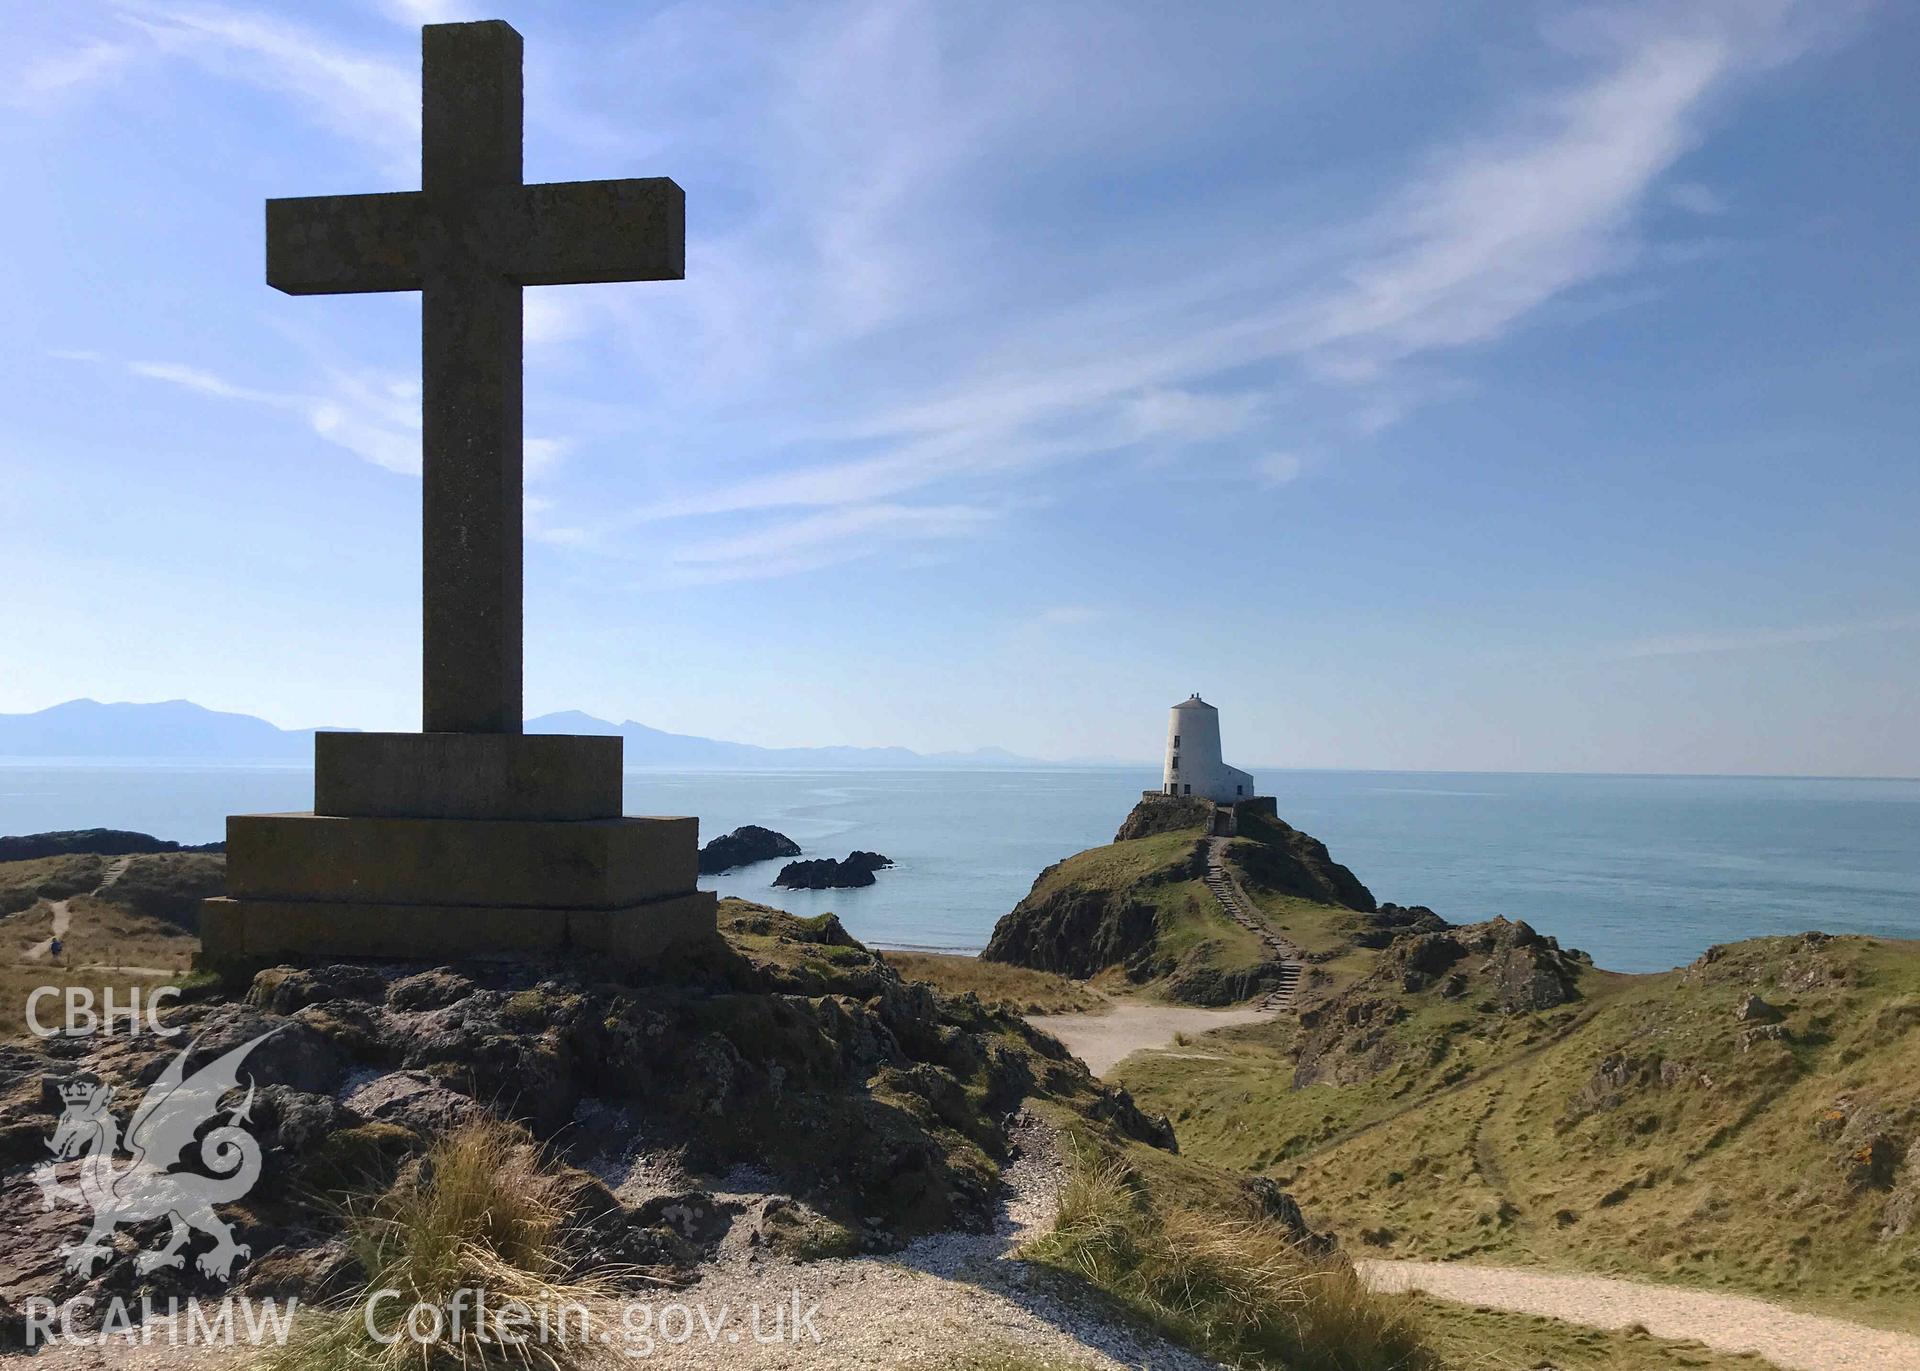 Digital photograph of Llanddwyn island lighthouse with cross in foreground. Produced by Paul Davis in 2020